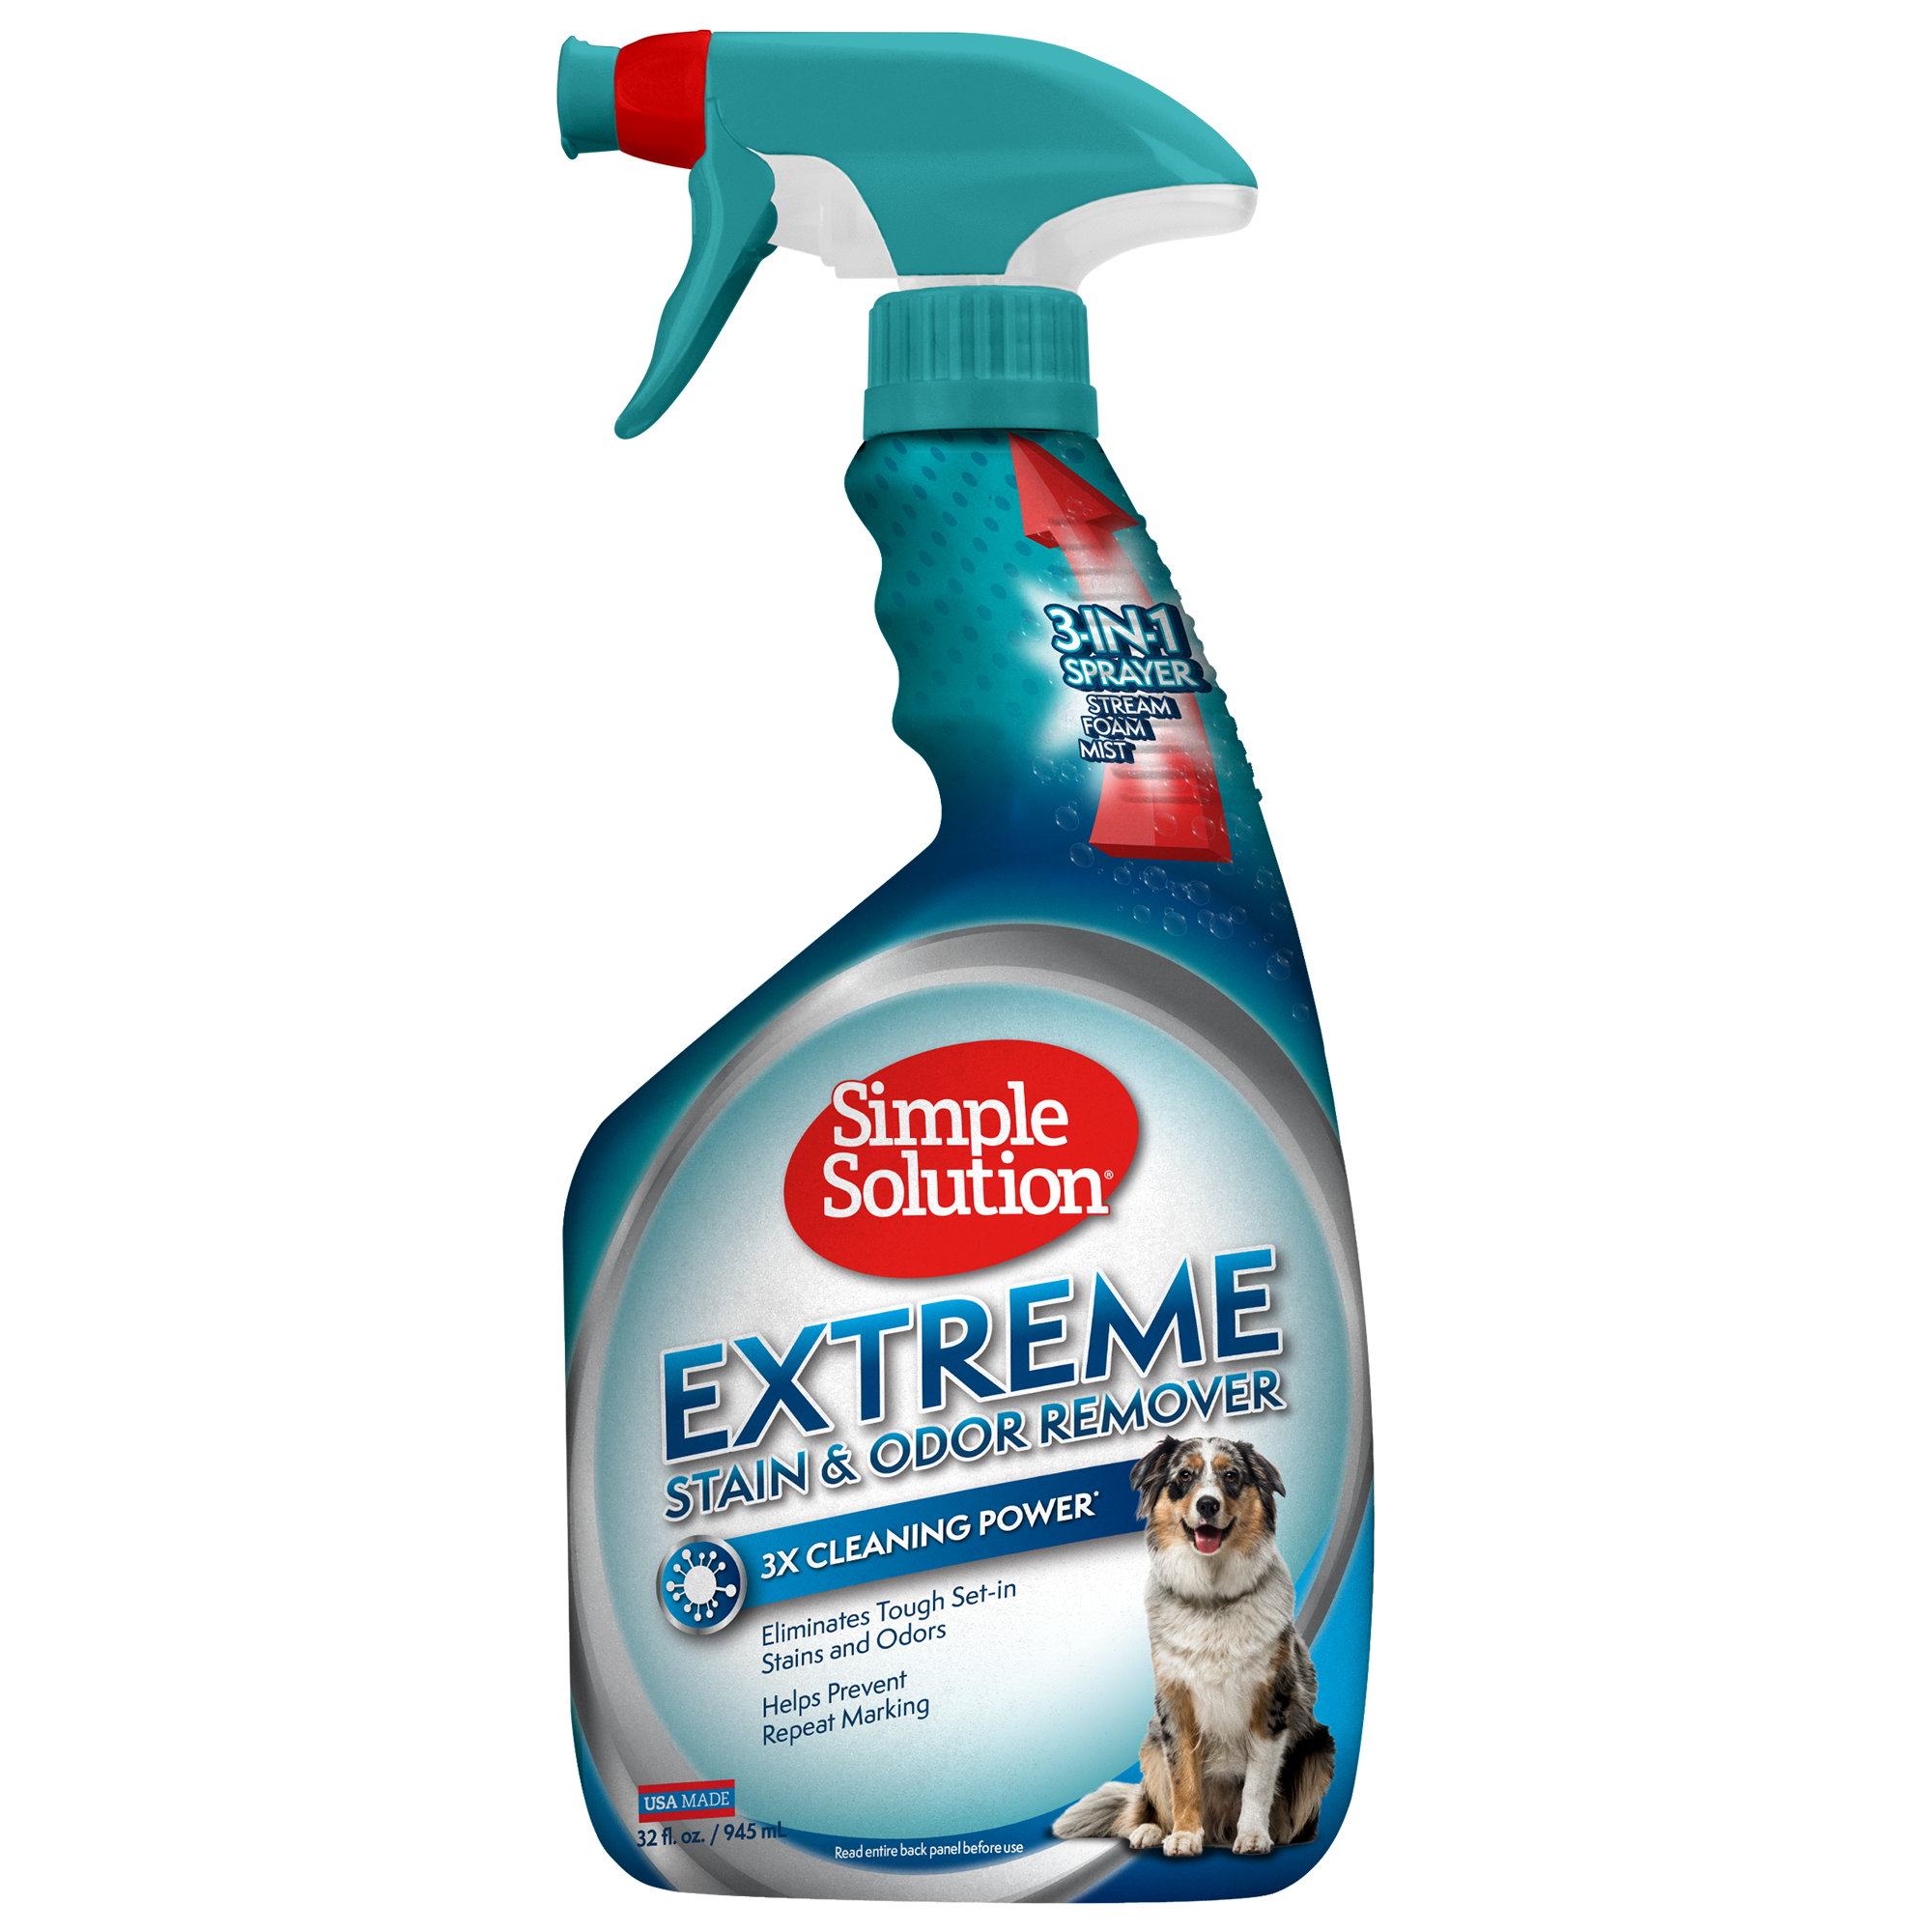 Simple Solution Extreme Formula Pet Stain  Odor Remover, 32 oz, 